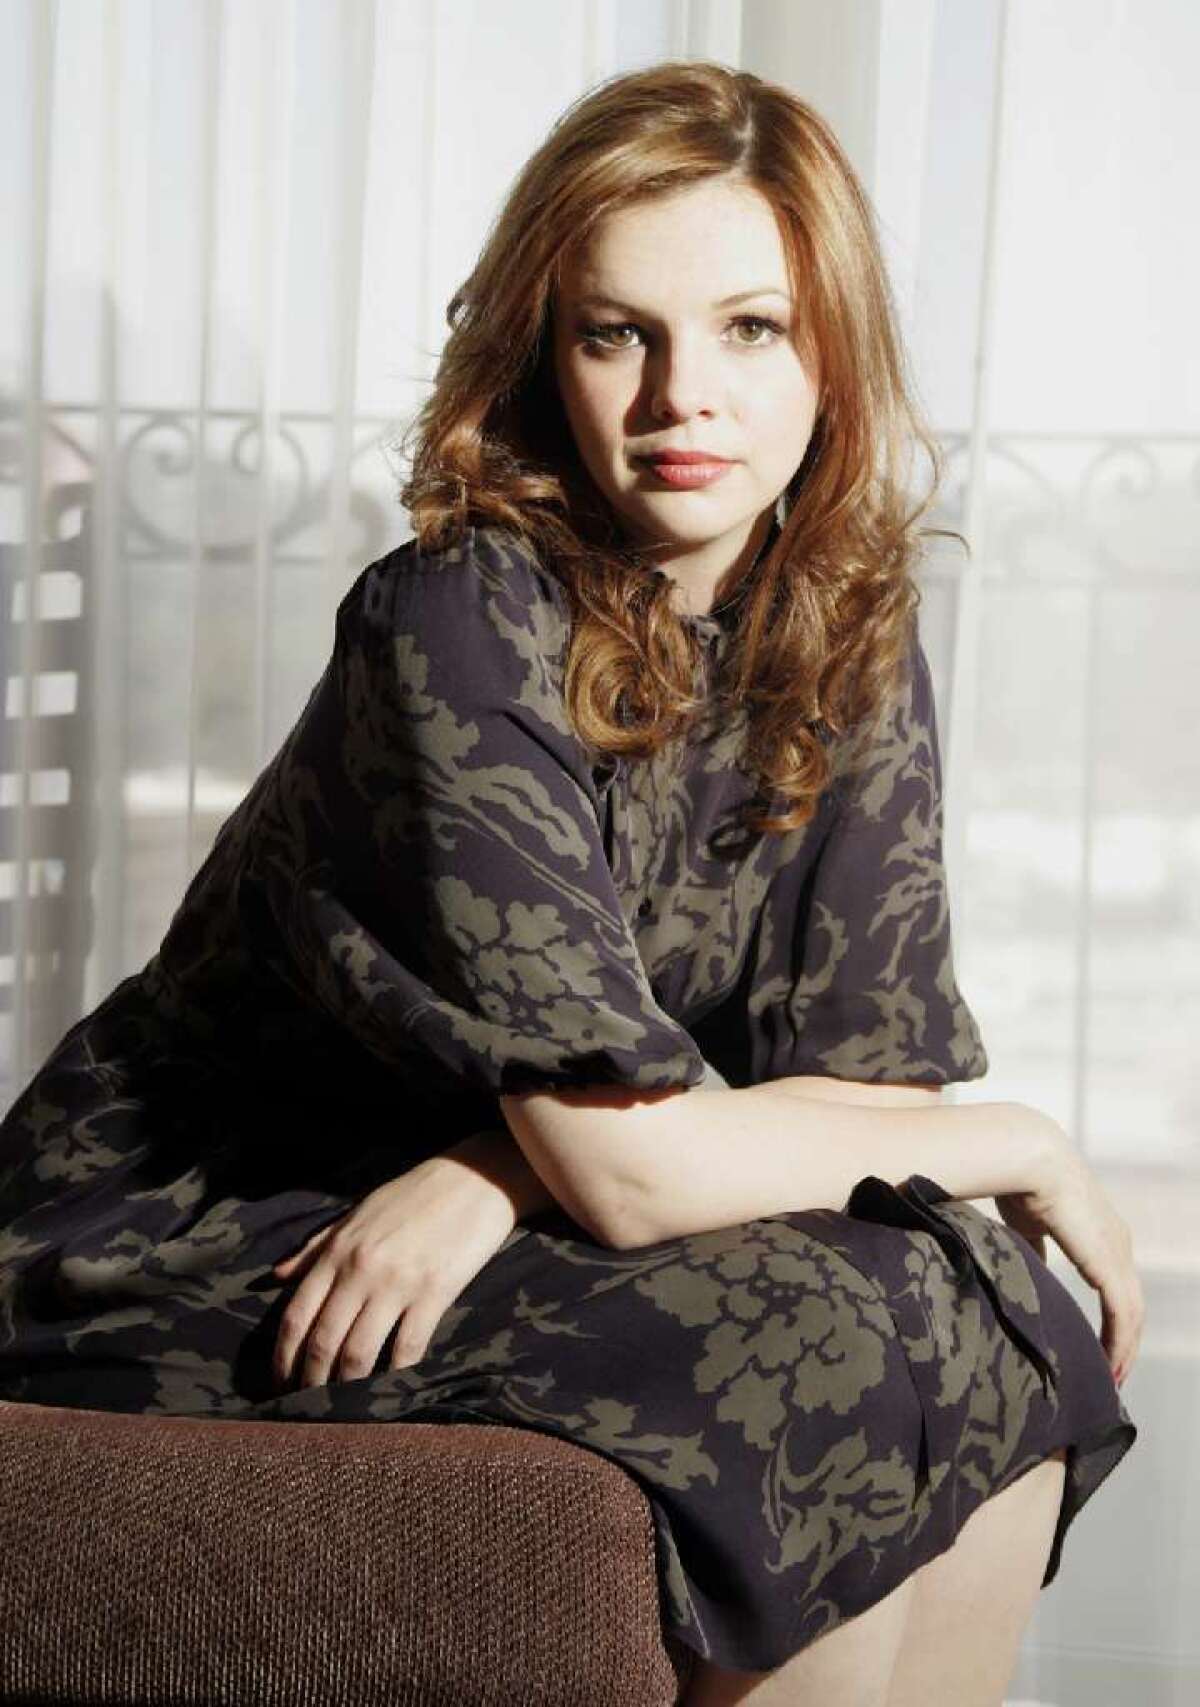 Amber Tamblyn, pictured in 2007, will play Charlie Harper's lesbian daughter on "Two and a Half Men."